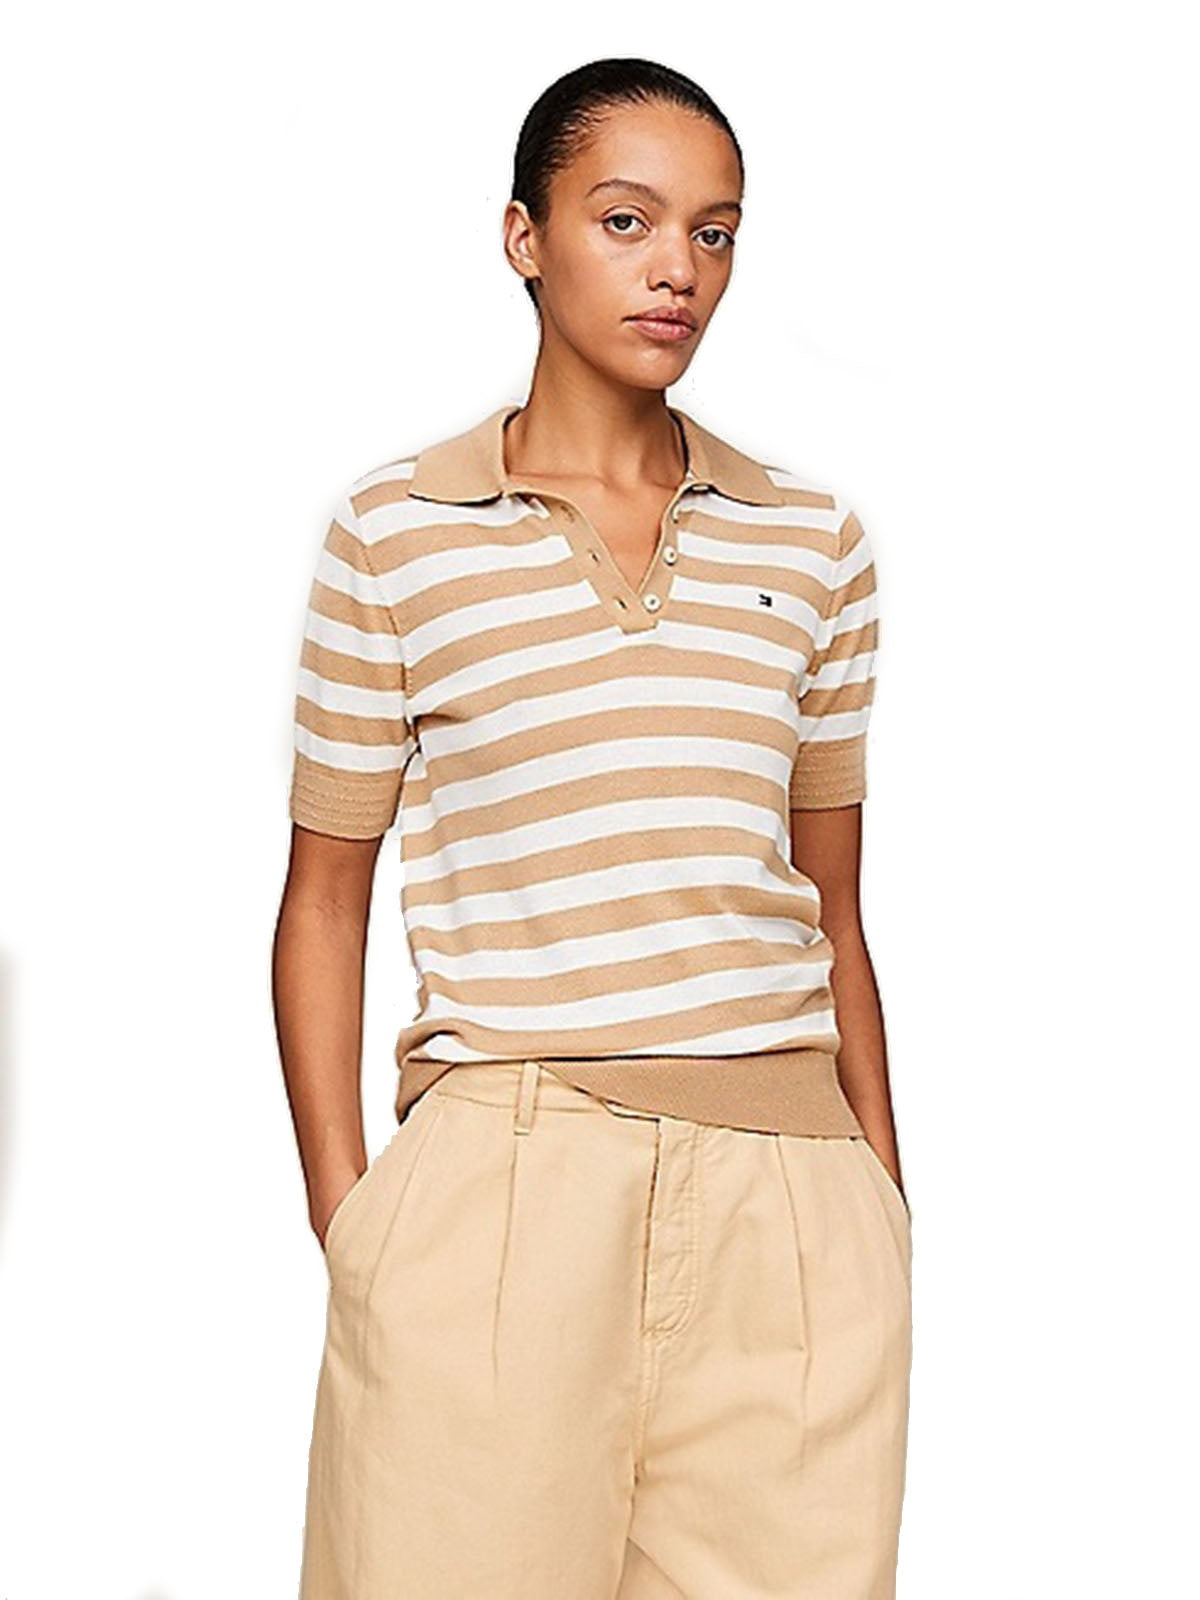 Polo Donna Tommy Hilfiger - Polo Regular Fit In Maglia A Righe - Beige